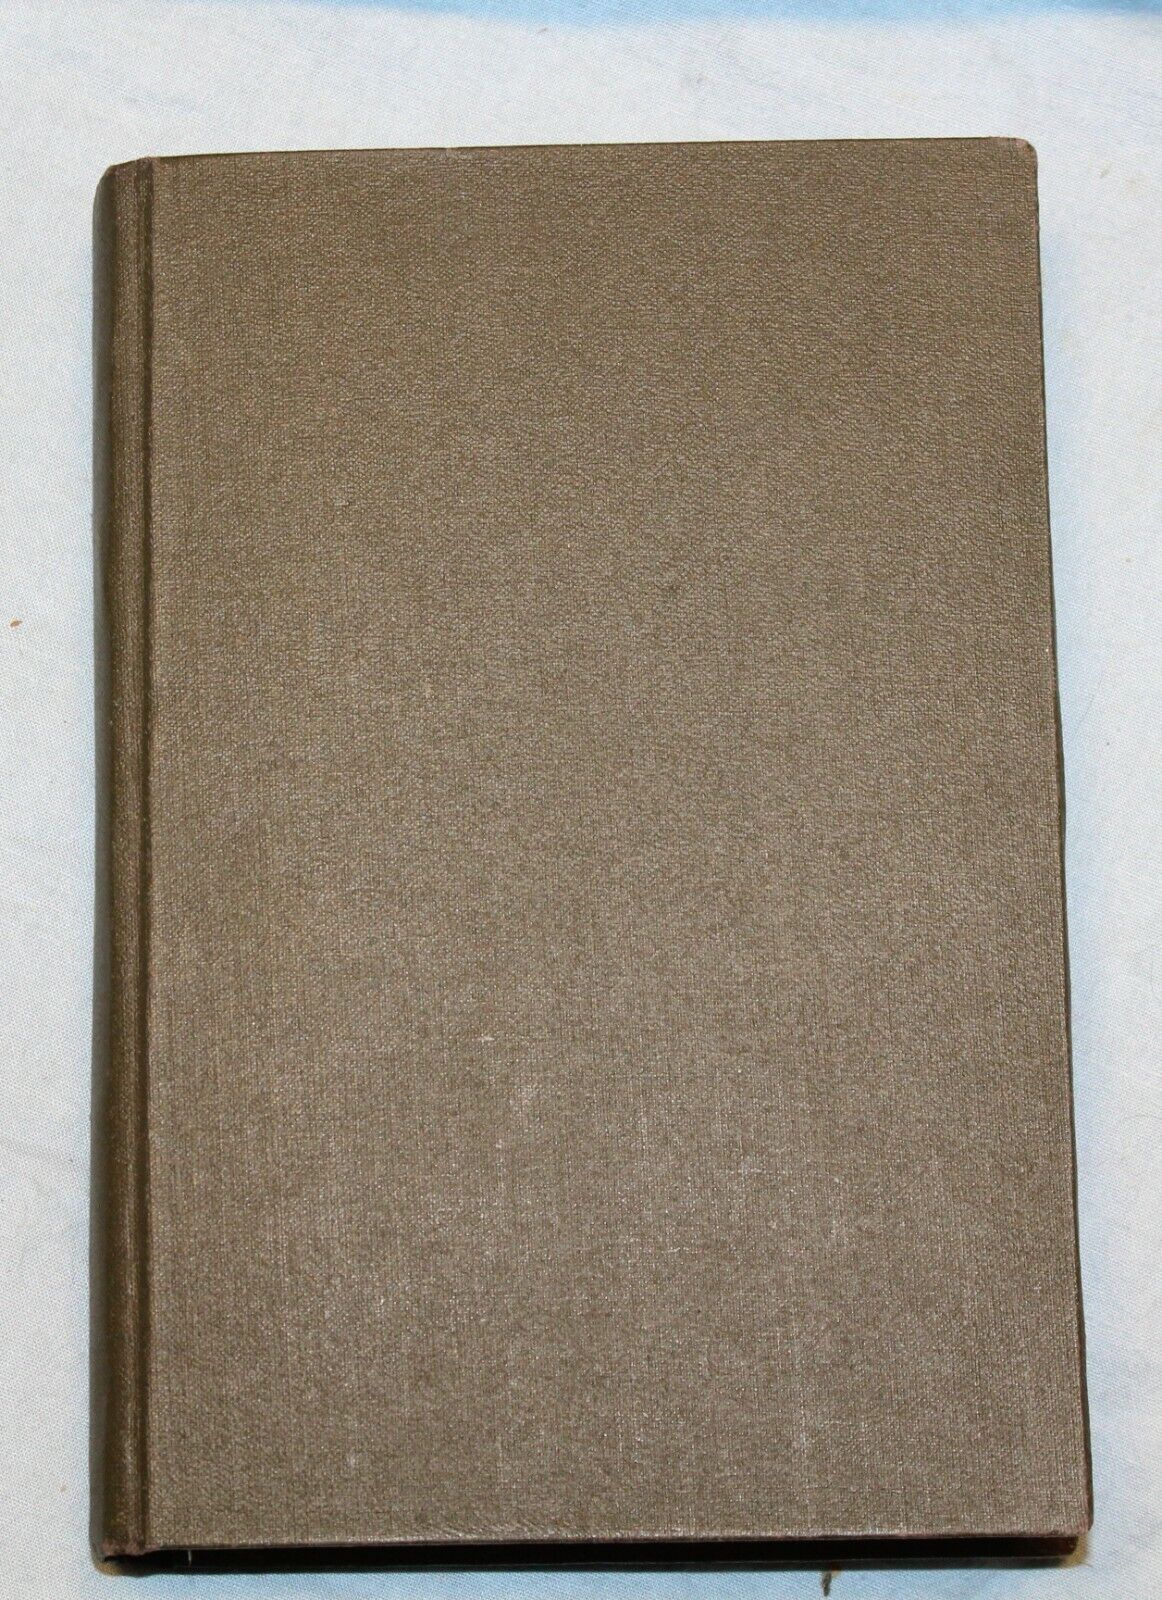 10783.Antique Chess Book. N. Grekov. M. I. Chigorin. His life and work. 1939